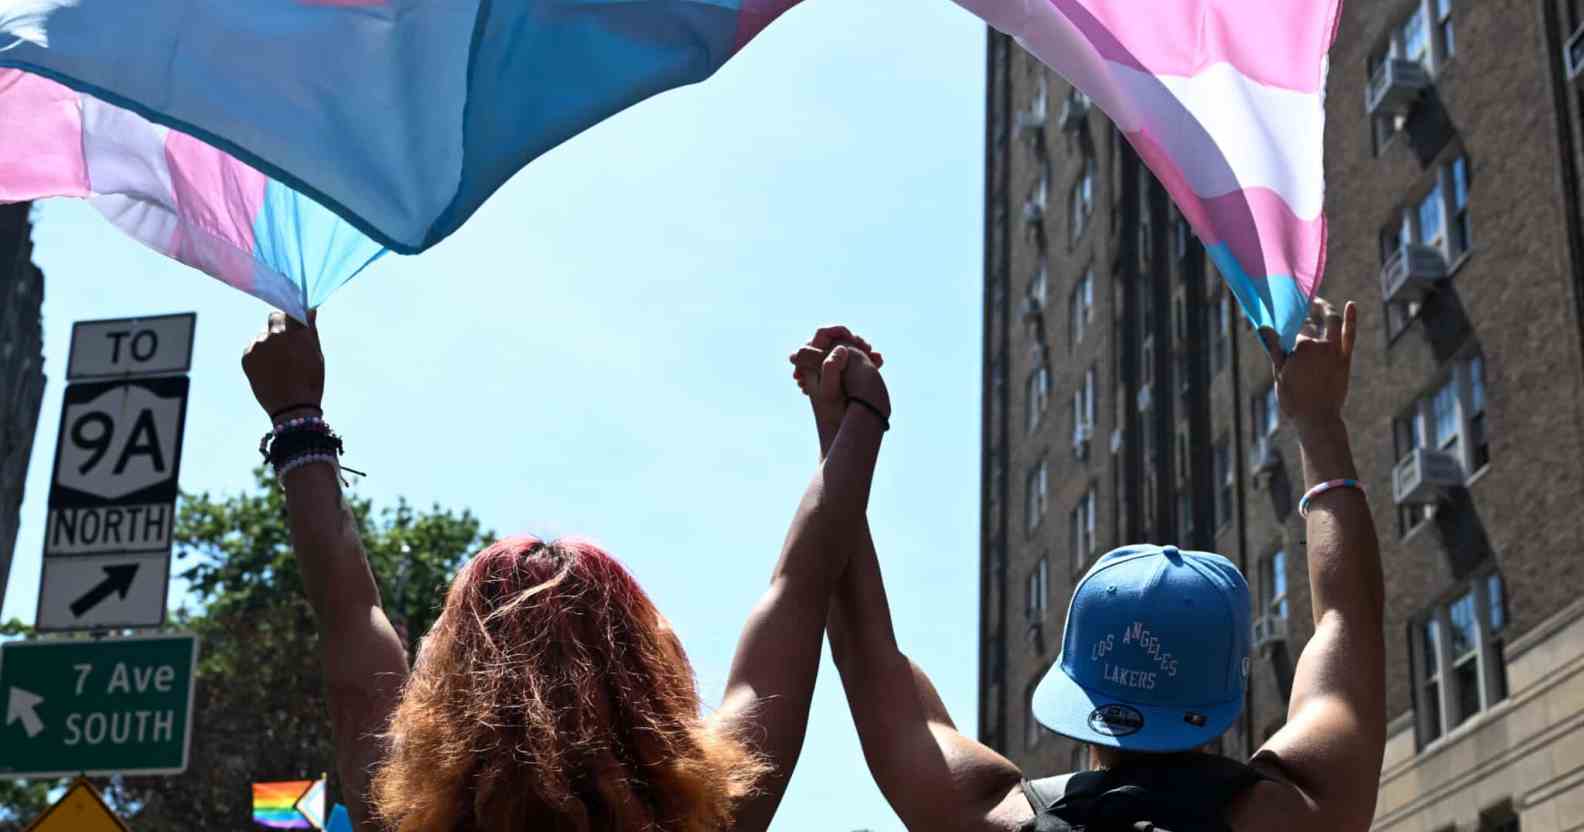 Two trans people hold hands as they march under a trans pride flag.